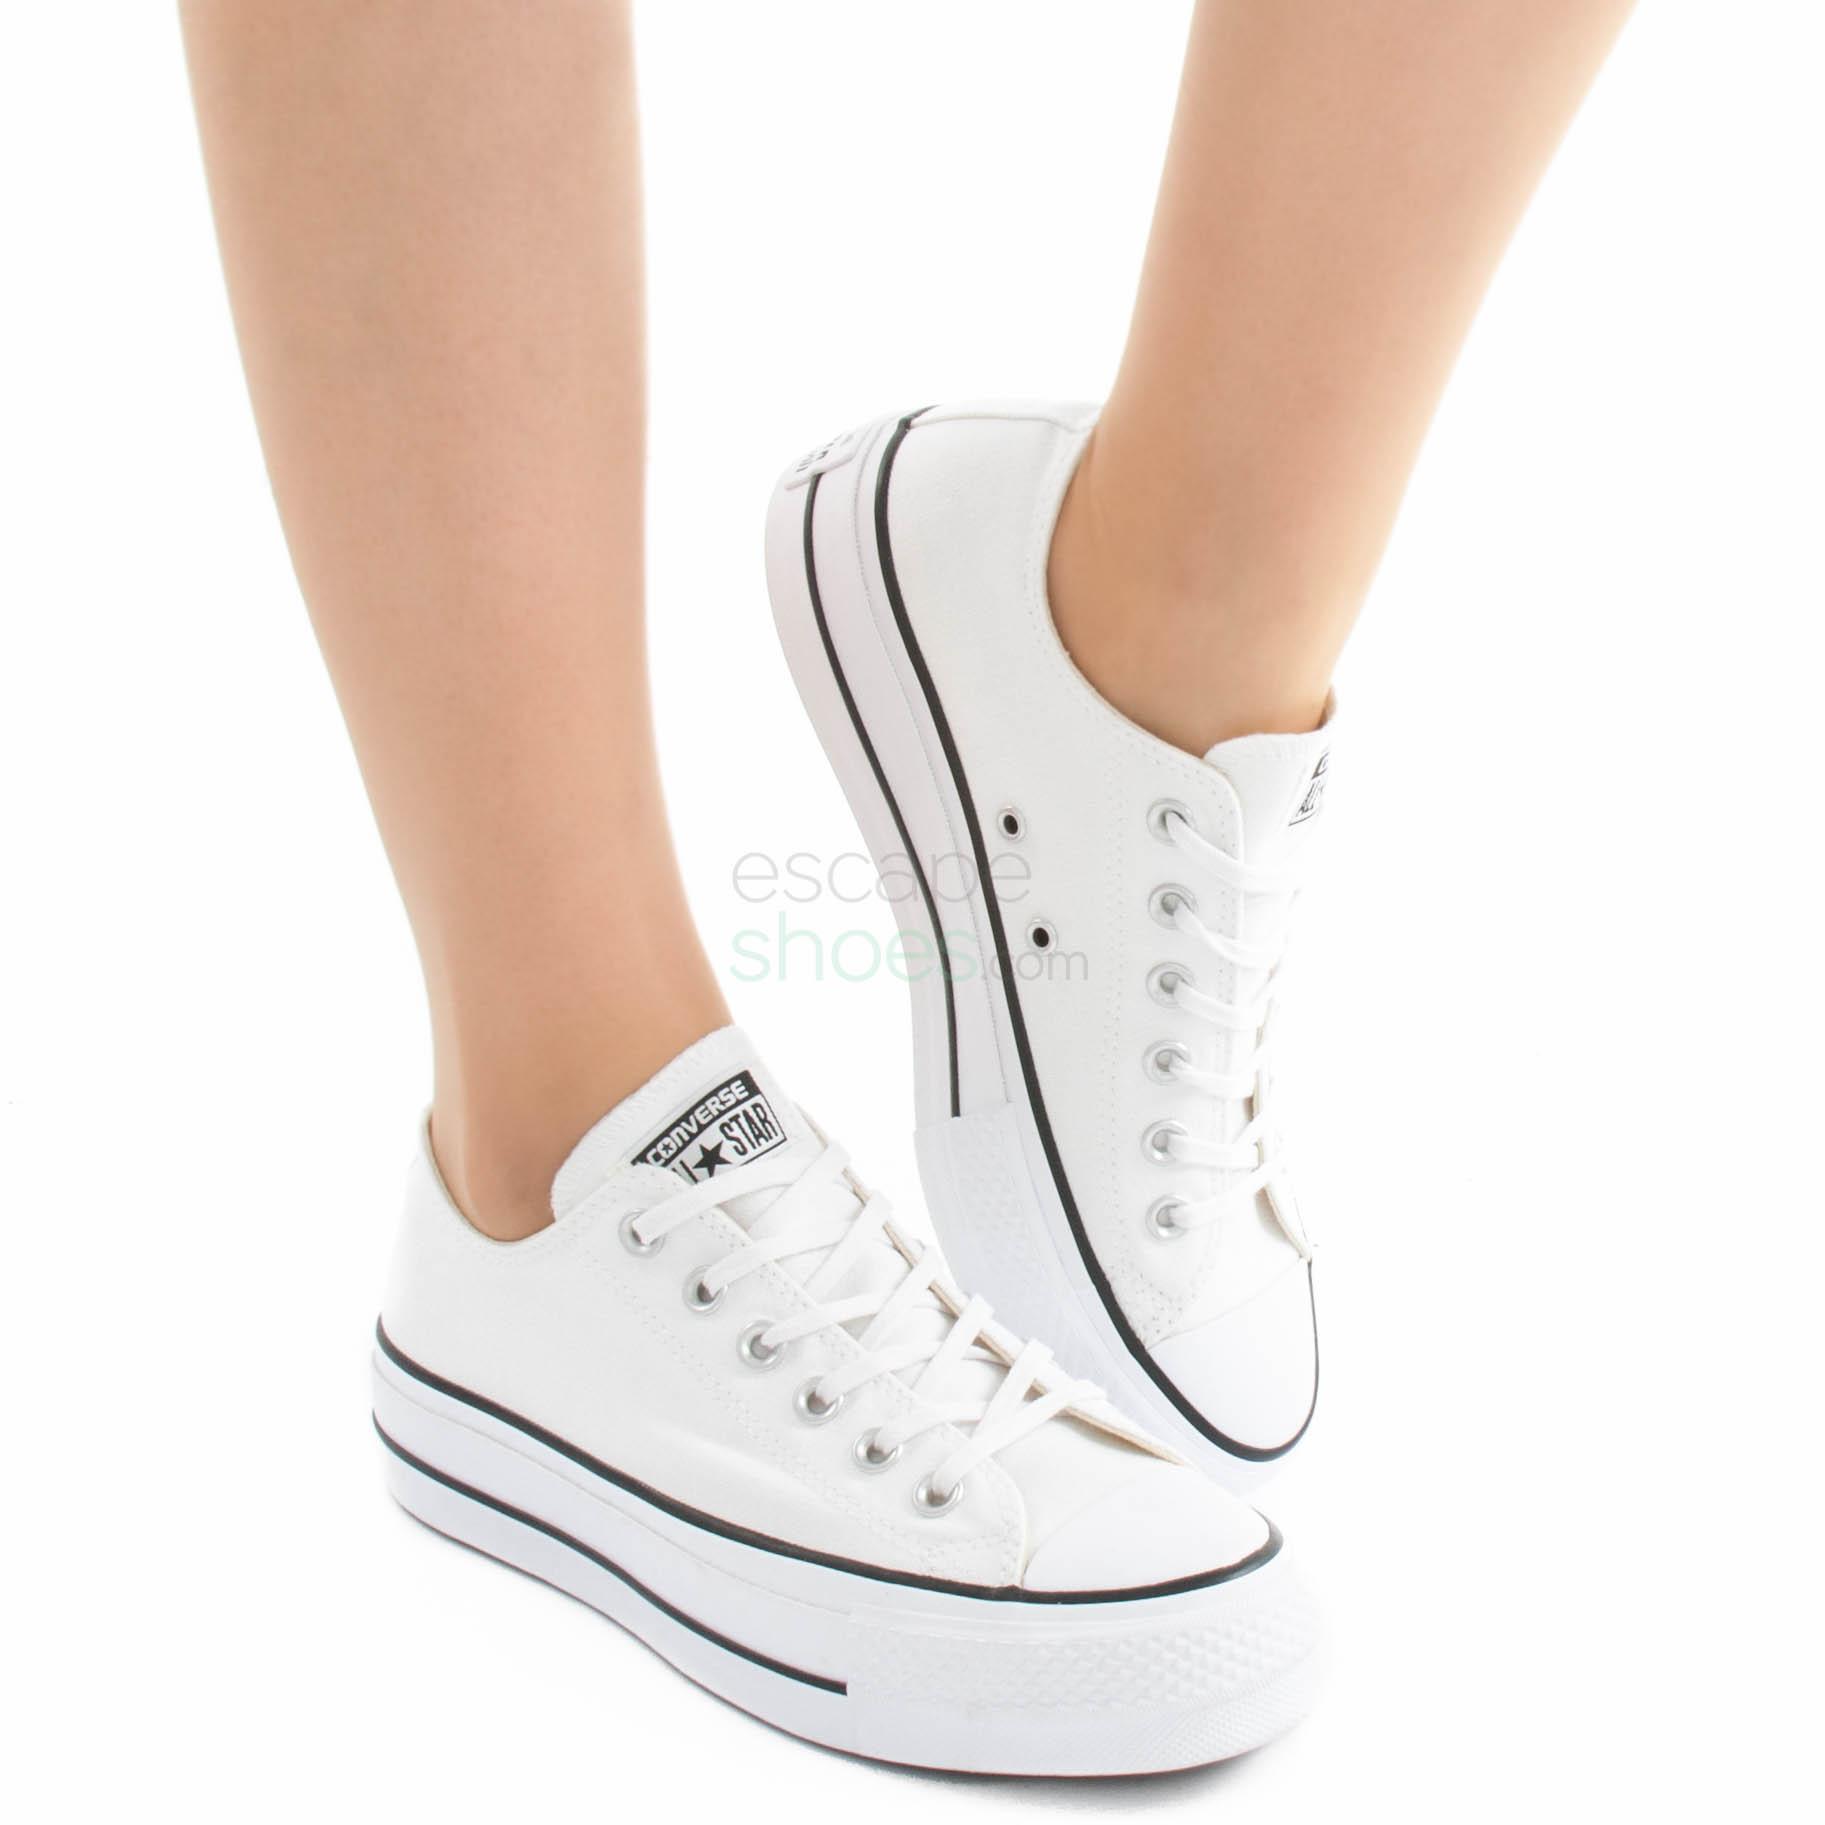 chuck taylor all star lift white